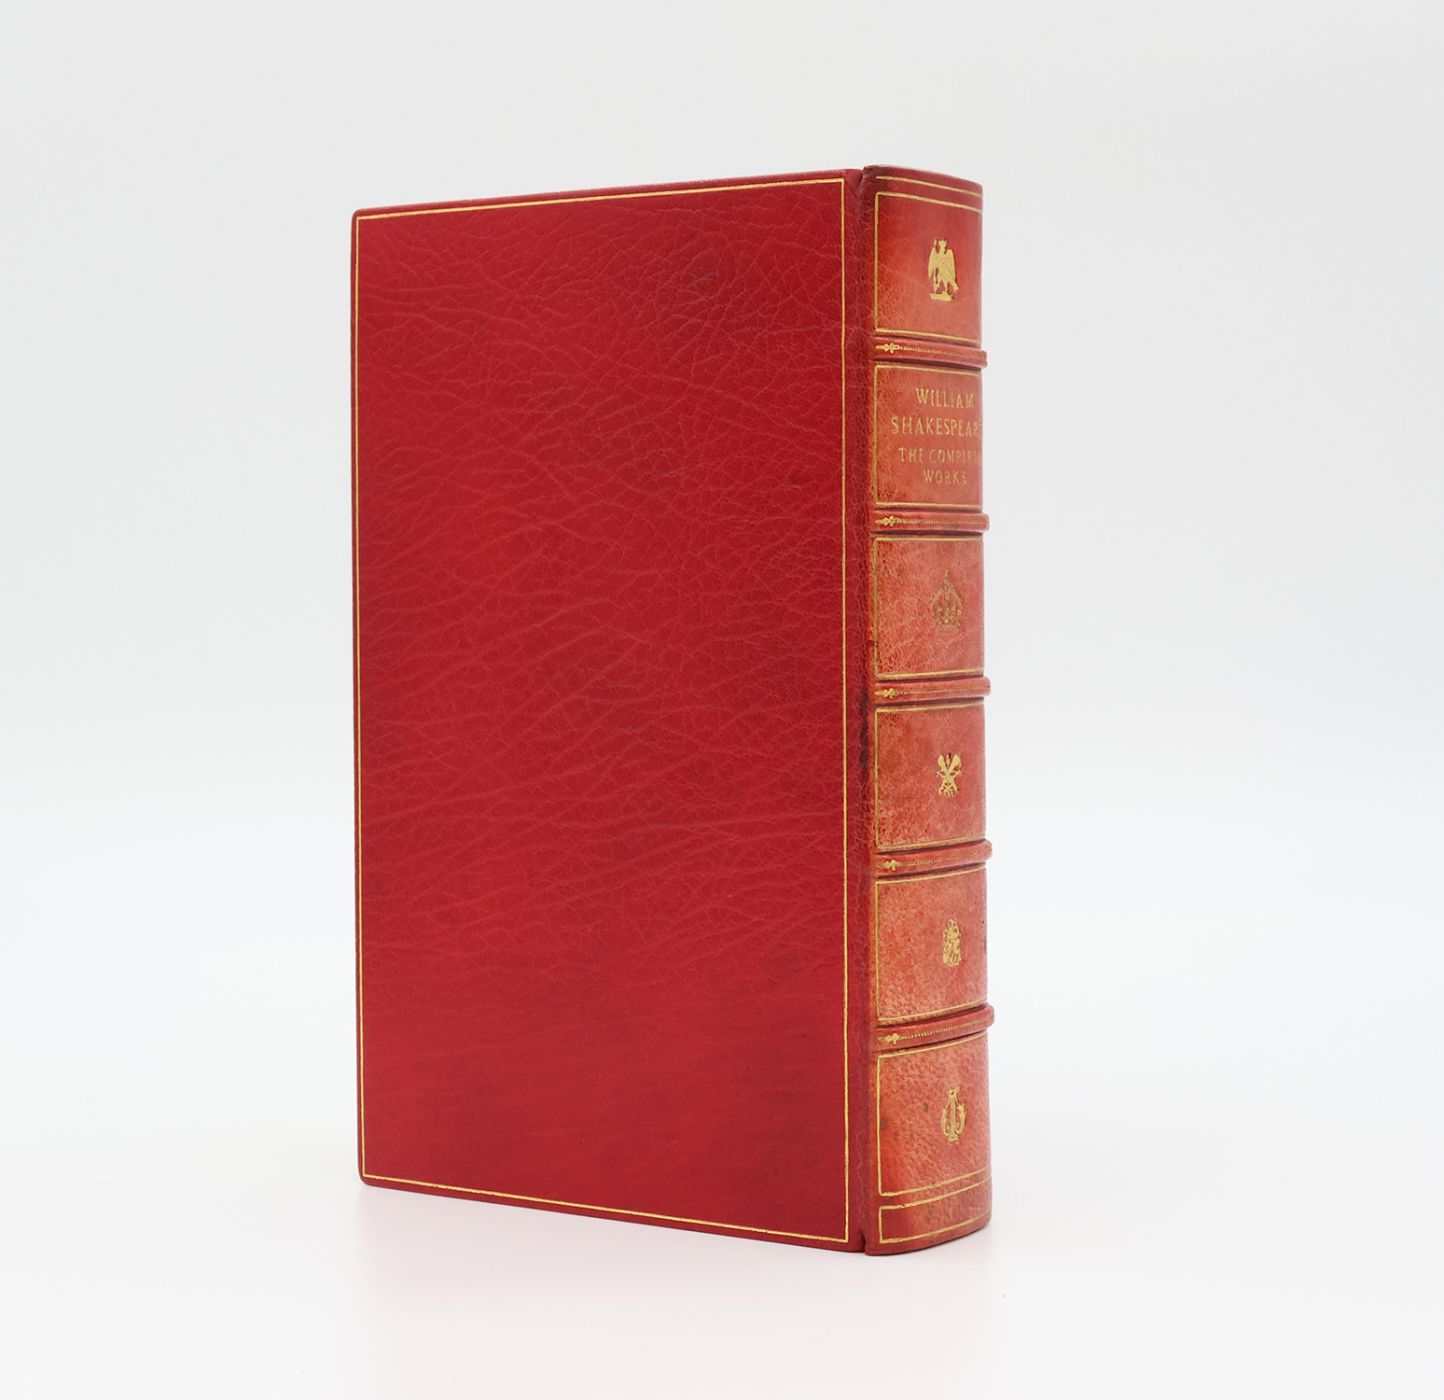 WILLIAM SHAKESPEARE: THE COMPLETE WORKS -  image 4